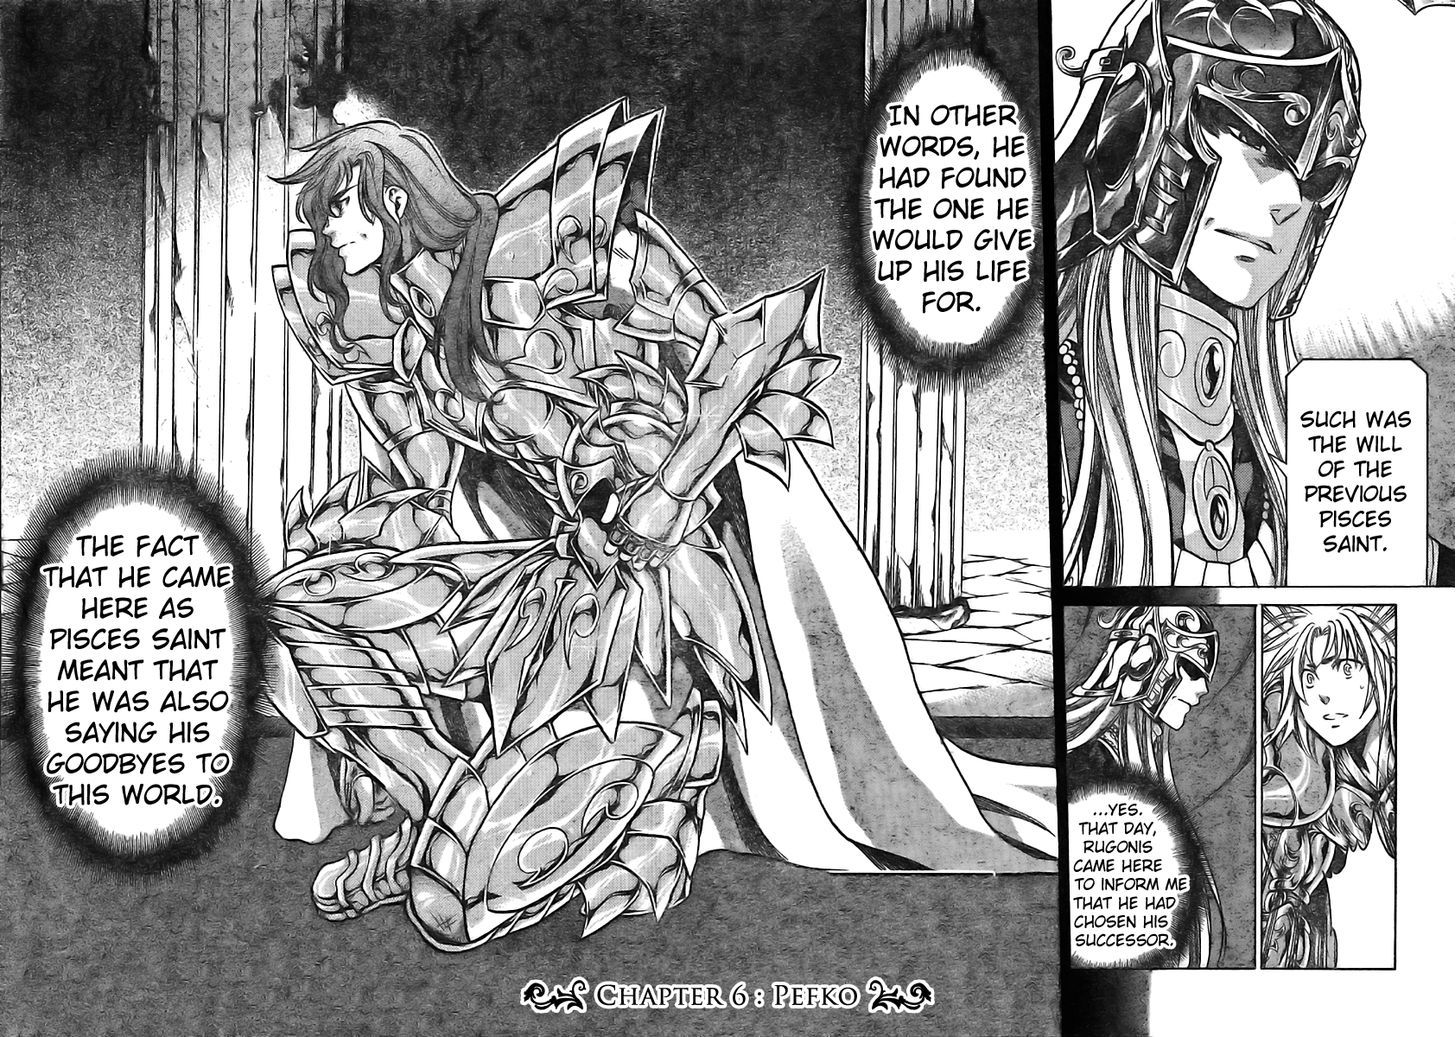 Saint Seiya - The Lost Canvas Gaiden Vol.1 Chapter 6: Pefko - Picture 2